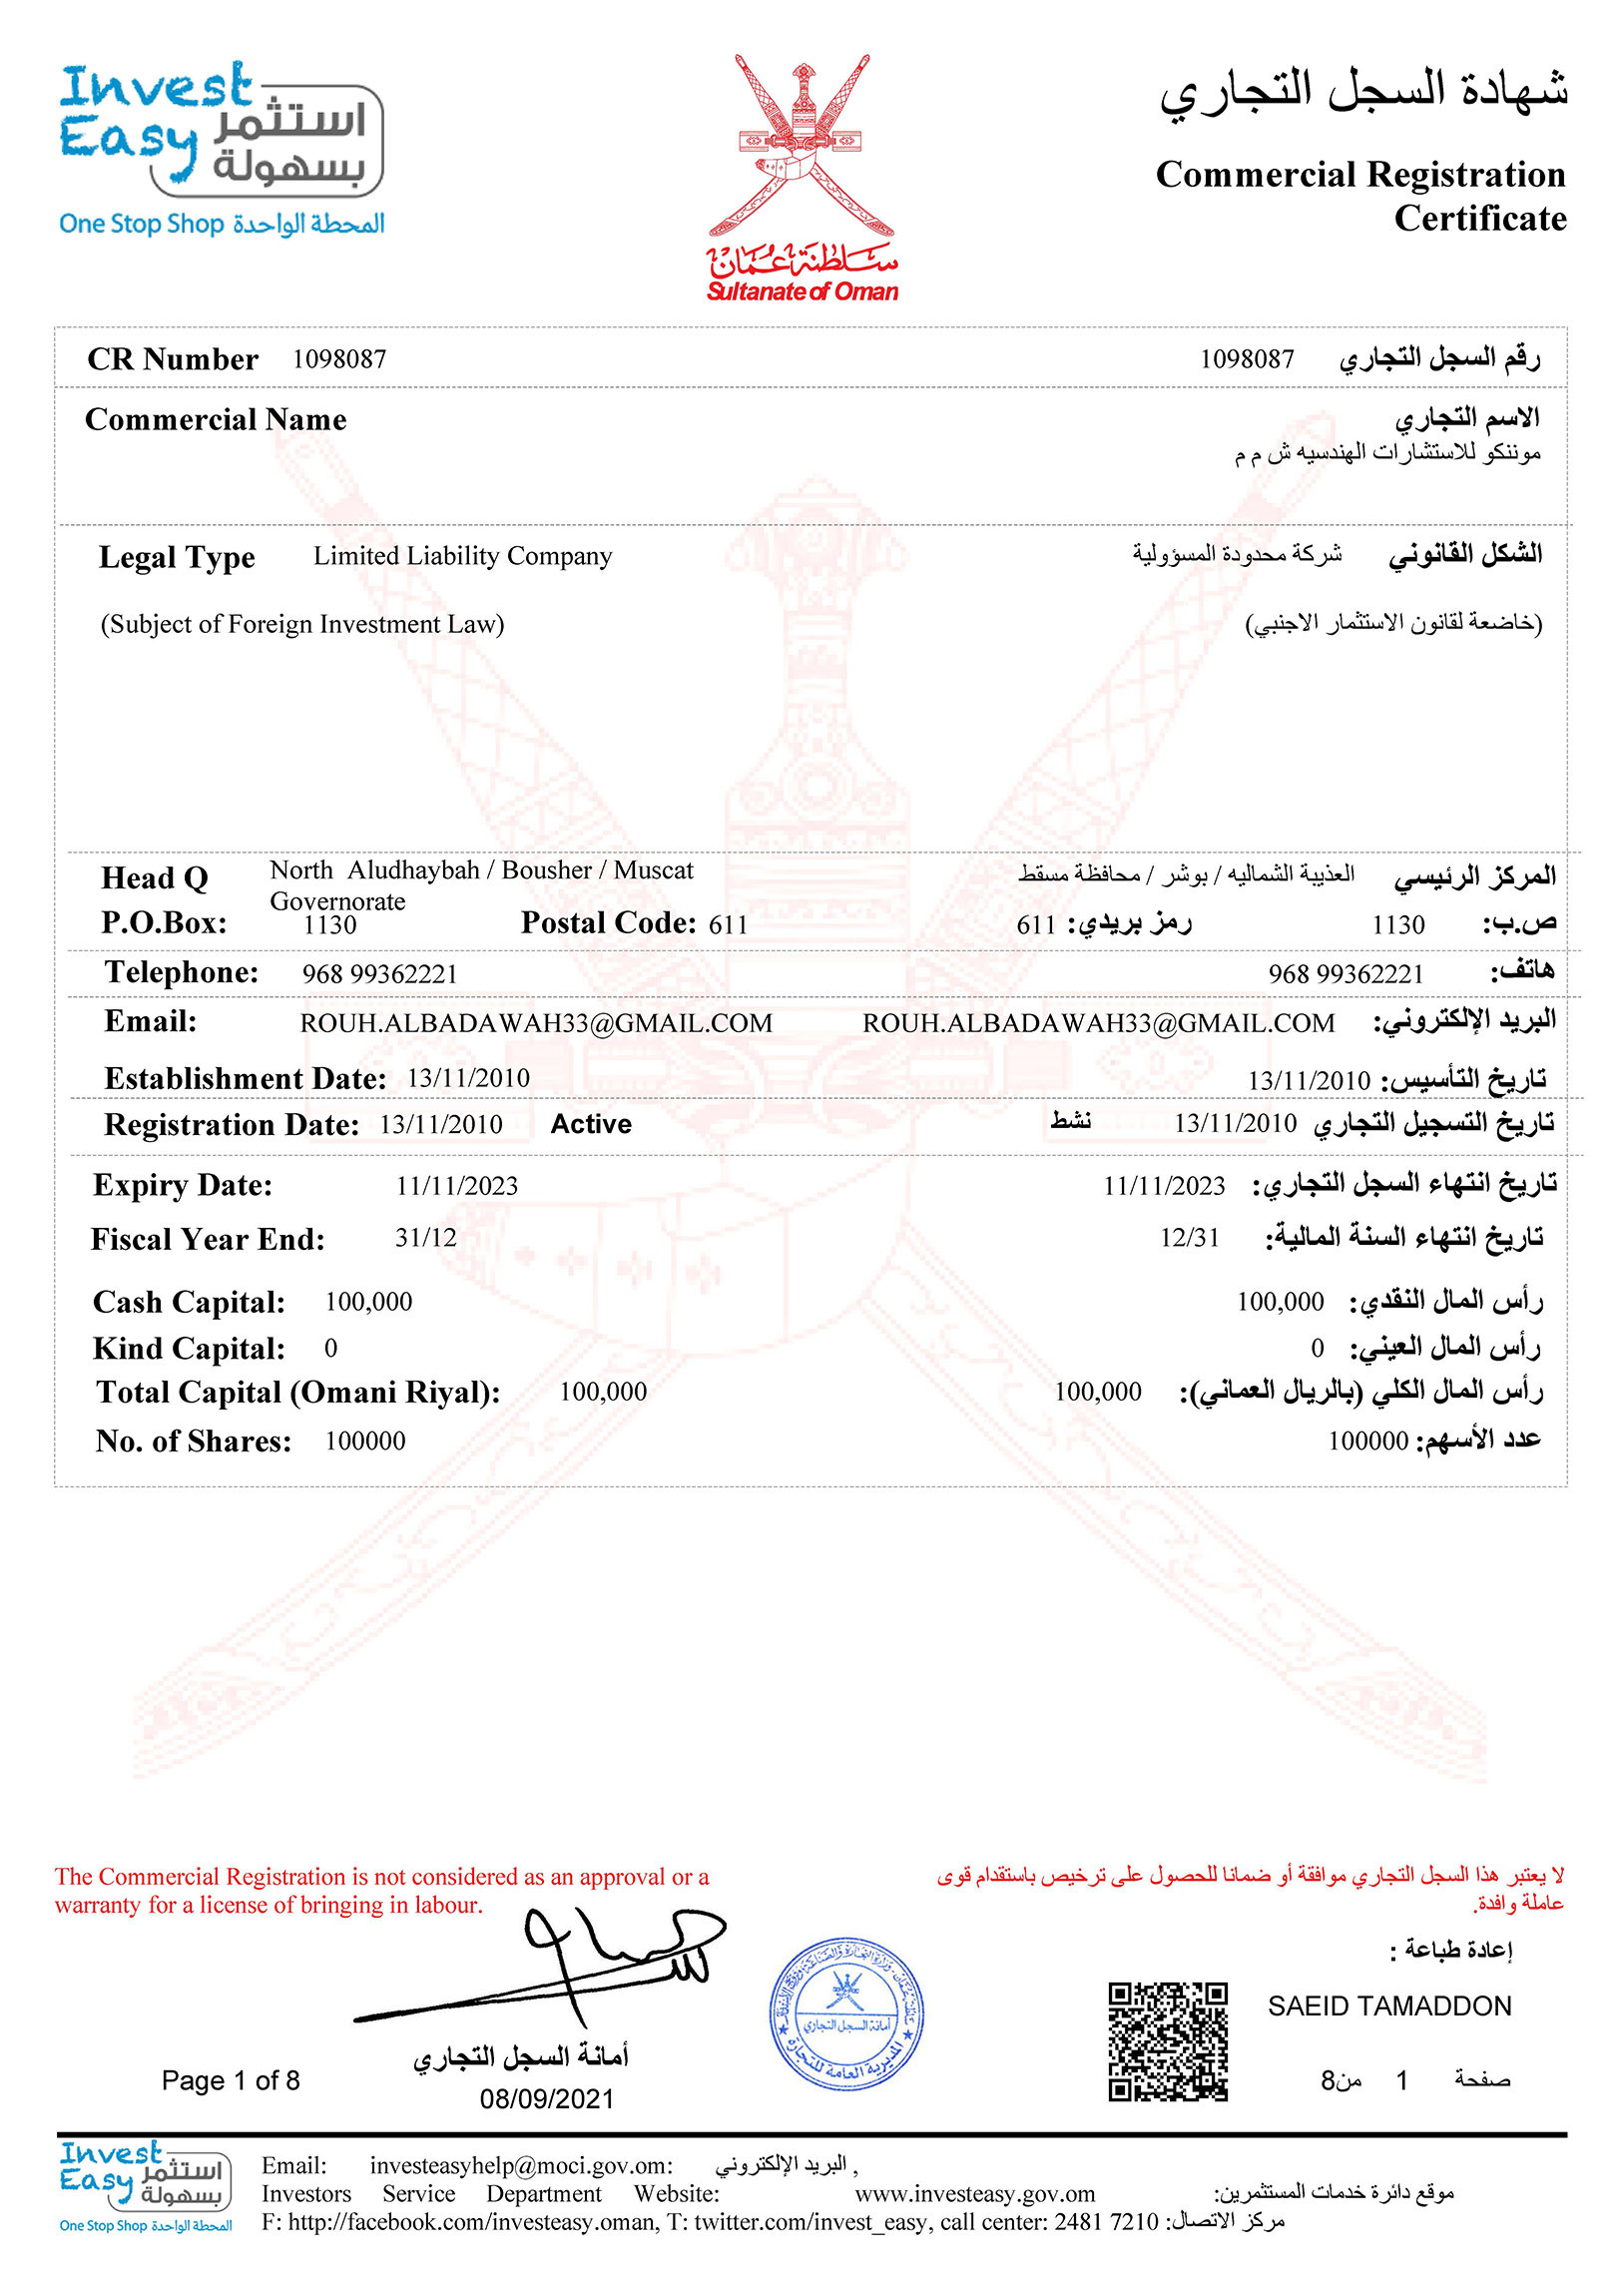  Monenco Oman New Commercial Registration Certificate is obtained successfully